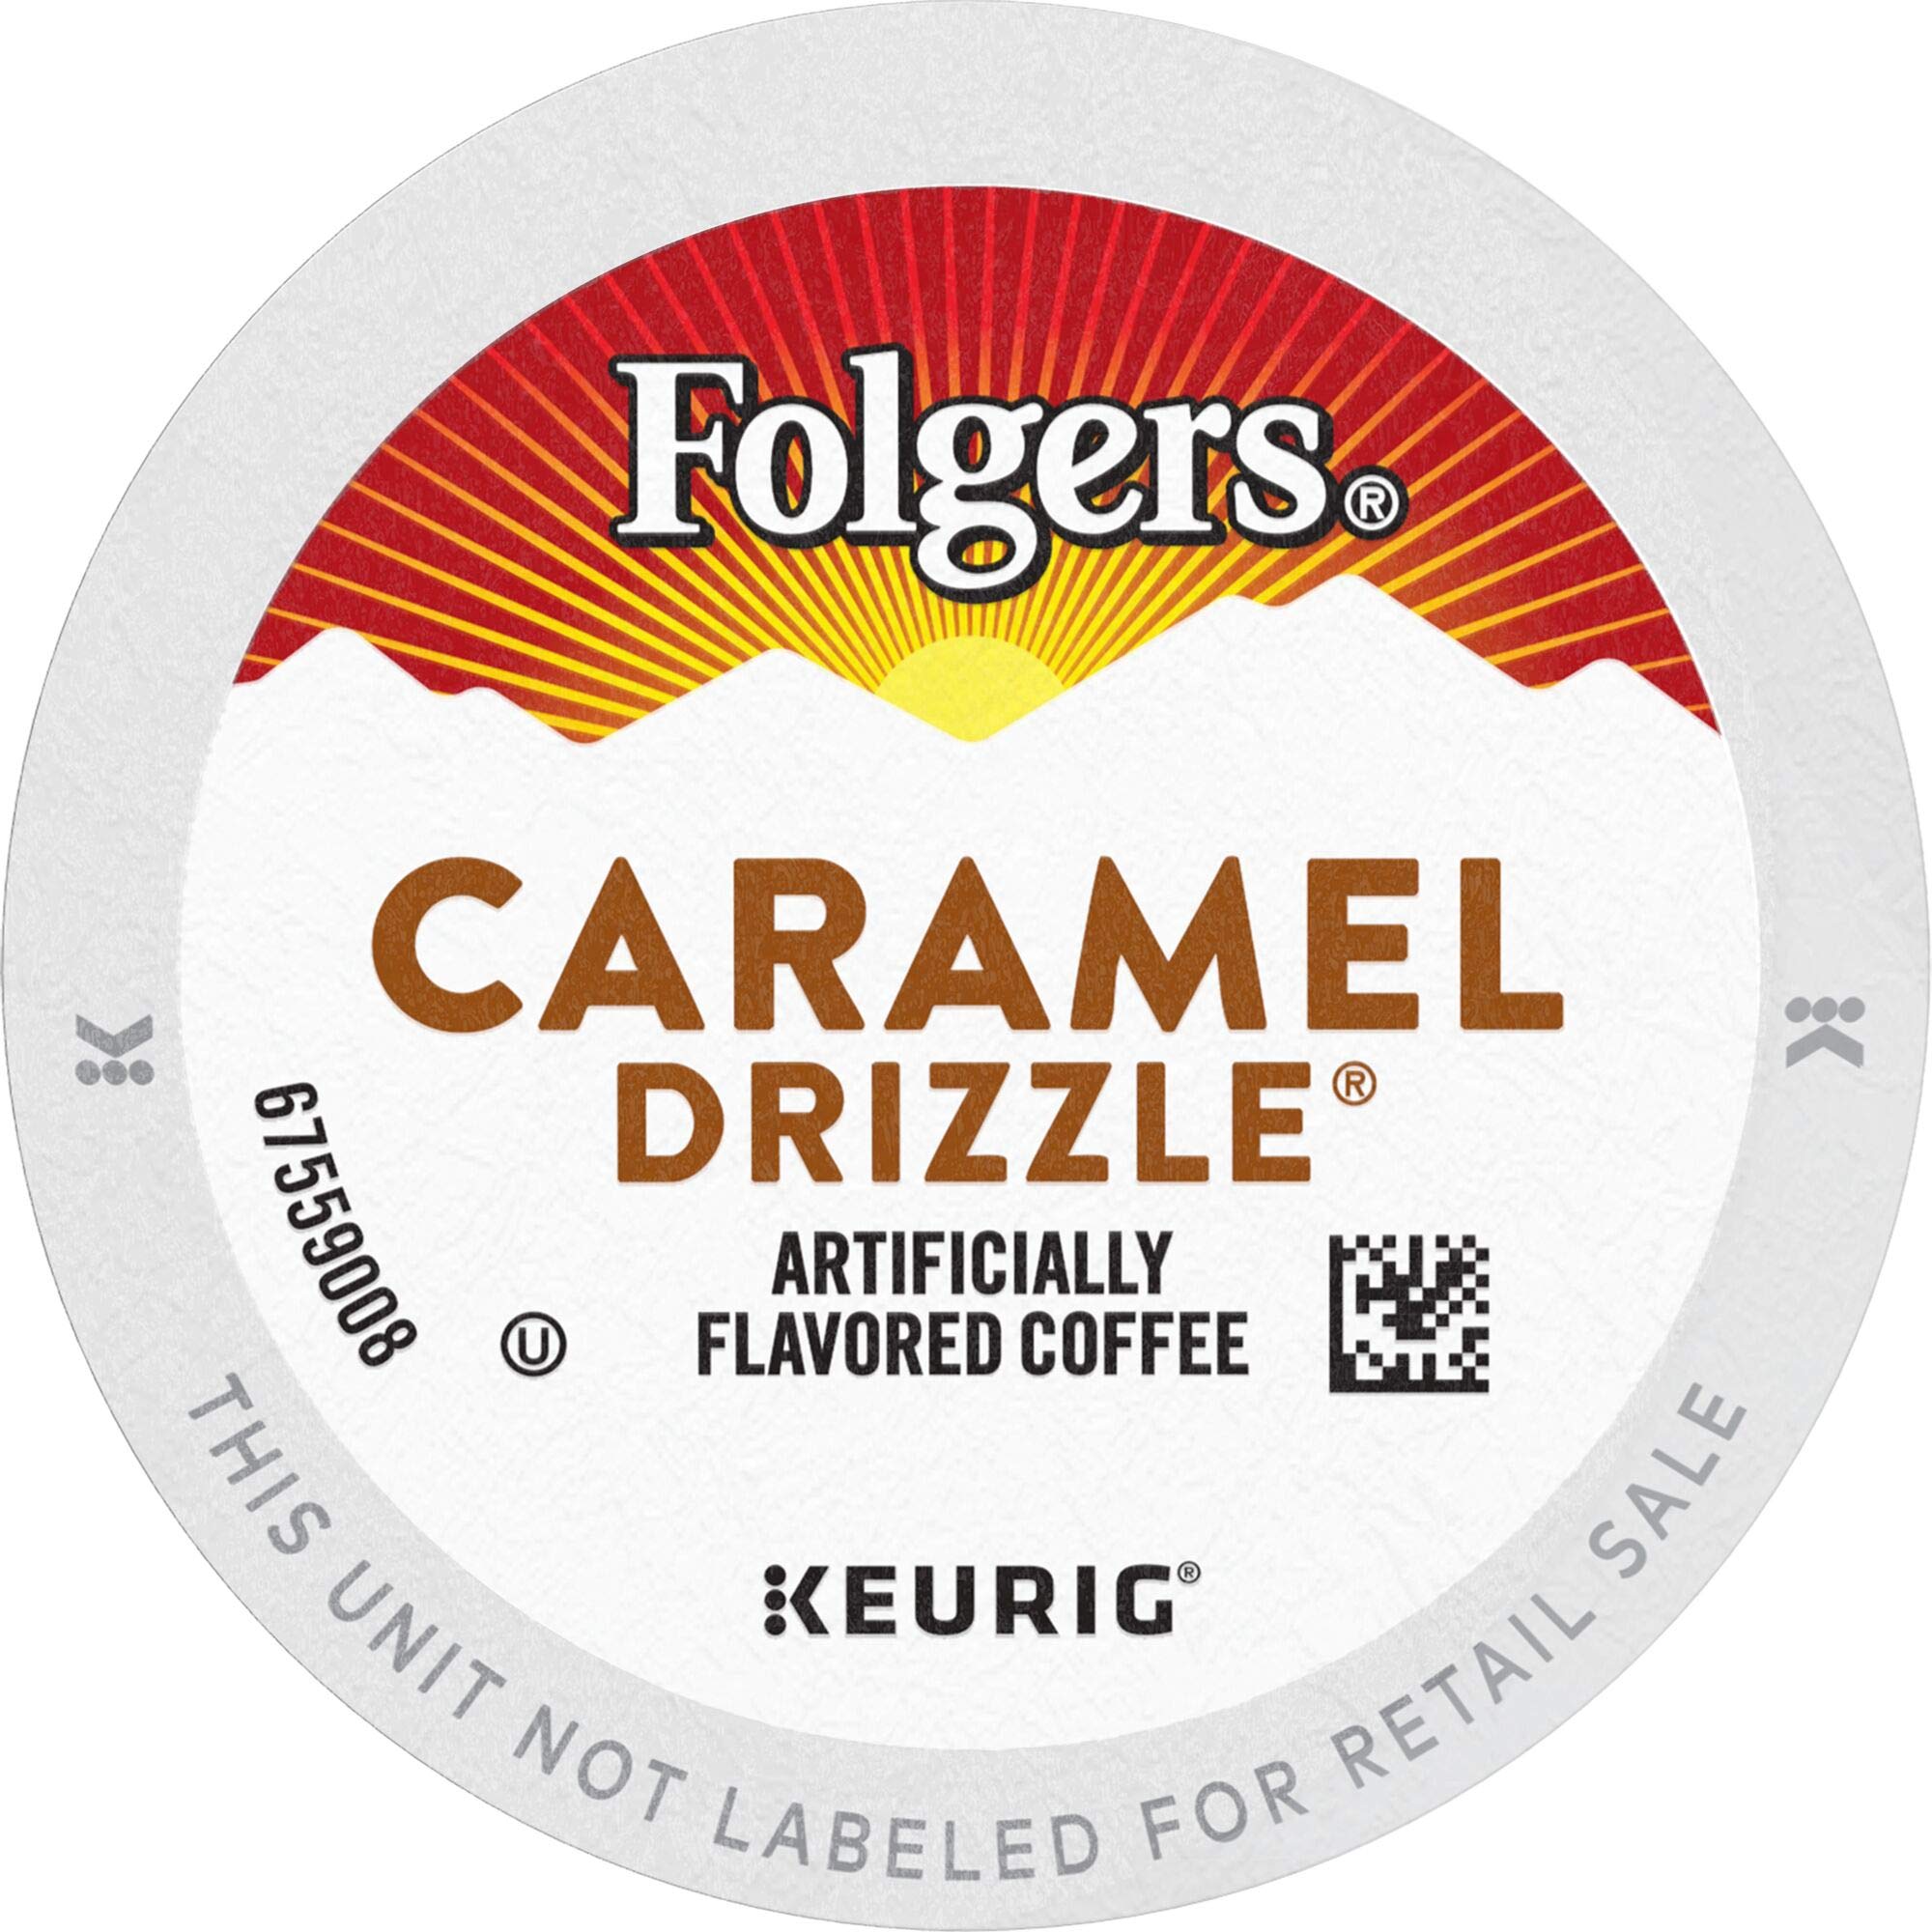 Folgers Caramel Drizzle Flavored Coffee, 96 Keurig K-Cup Pods